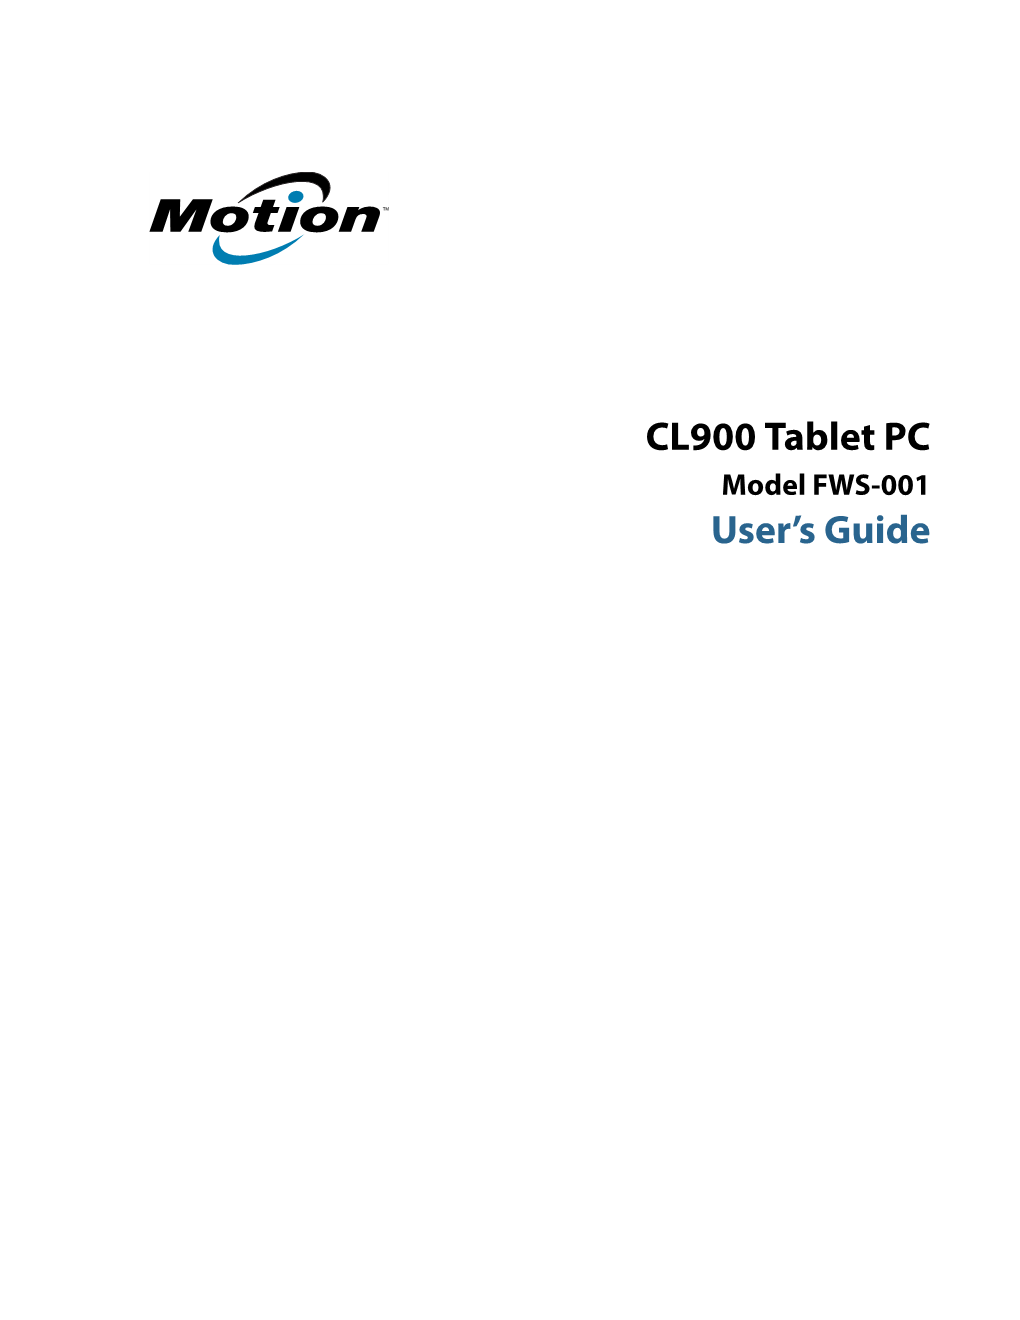 CL900 Tablet PC User's Guide